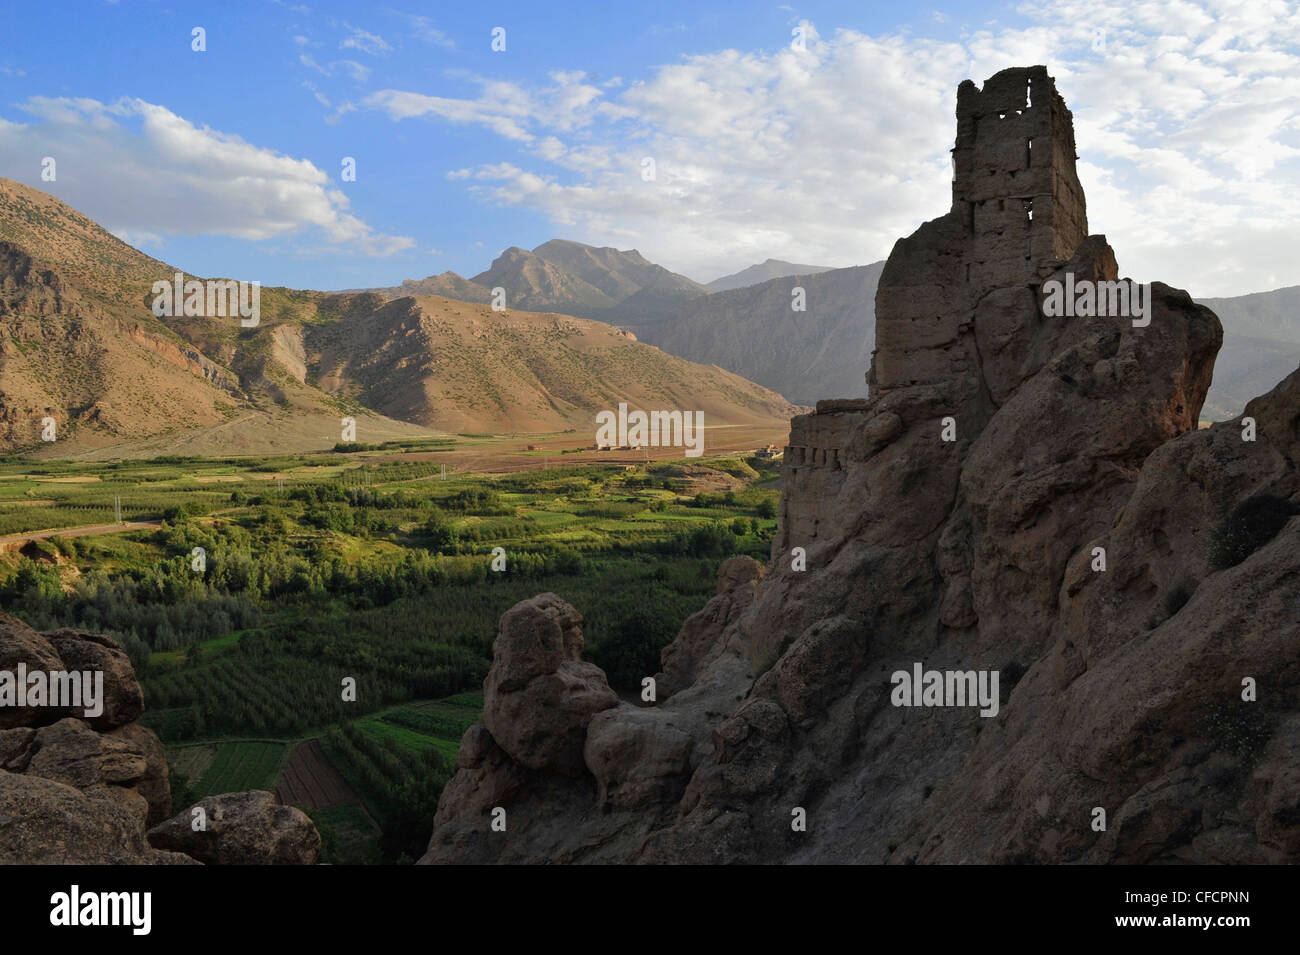 Ruin of an old fortress above Agouti village, Ait Bouguemez, High Atlas, Morocco, Africa Stock Photo